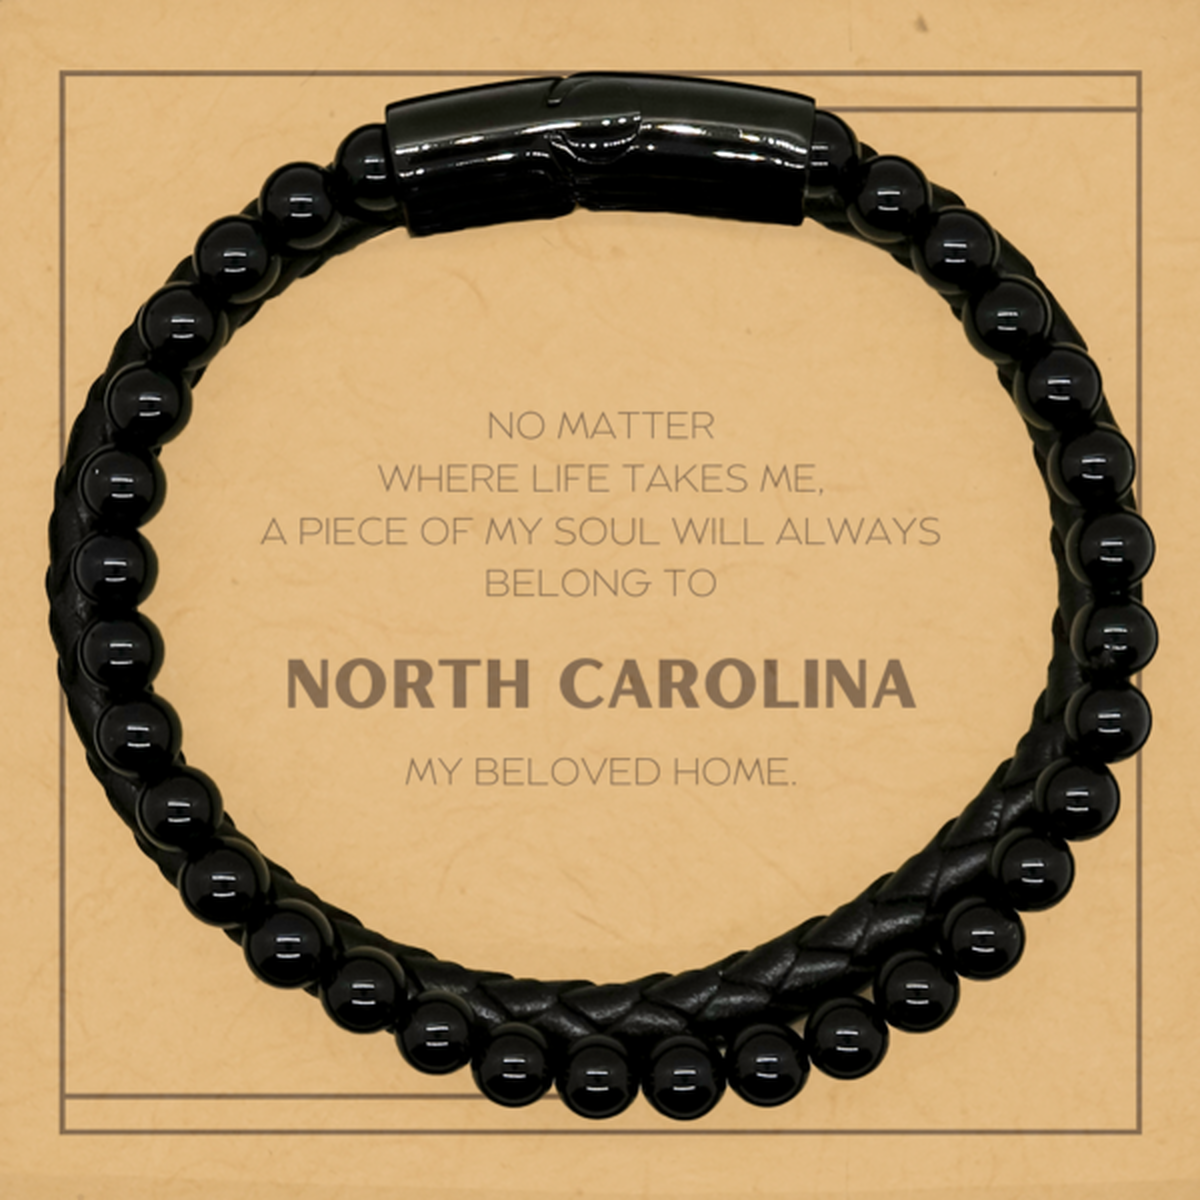 Love North Carolina State Gifts, My soul will always belong to North Carolina, Proud Stone Leather Bracelets, Birthday Unique Gifts For North Carolina Men, Women, Friends